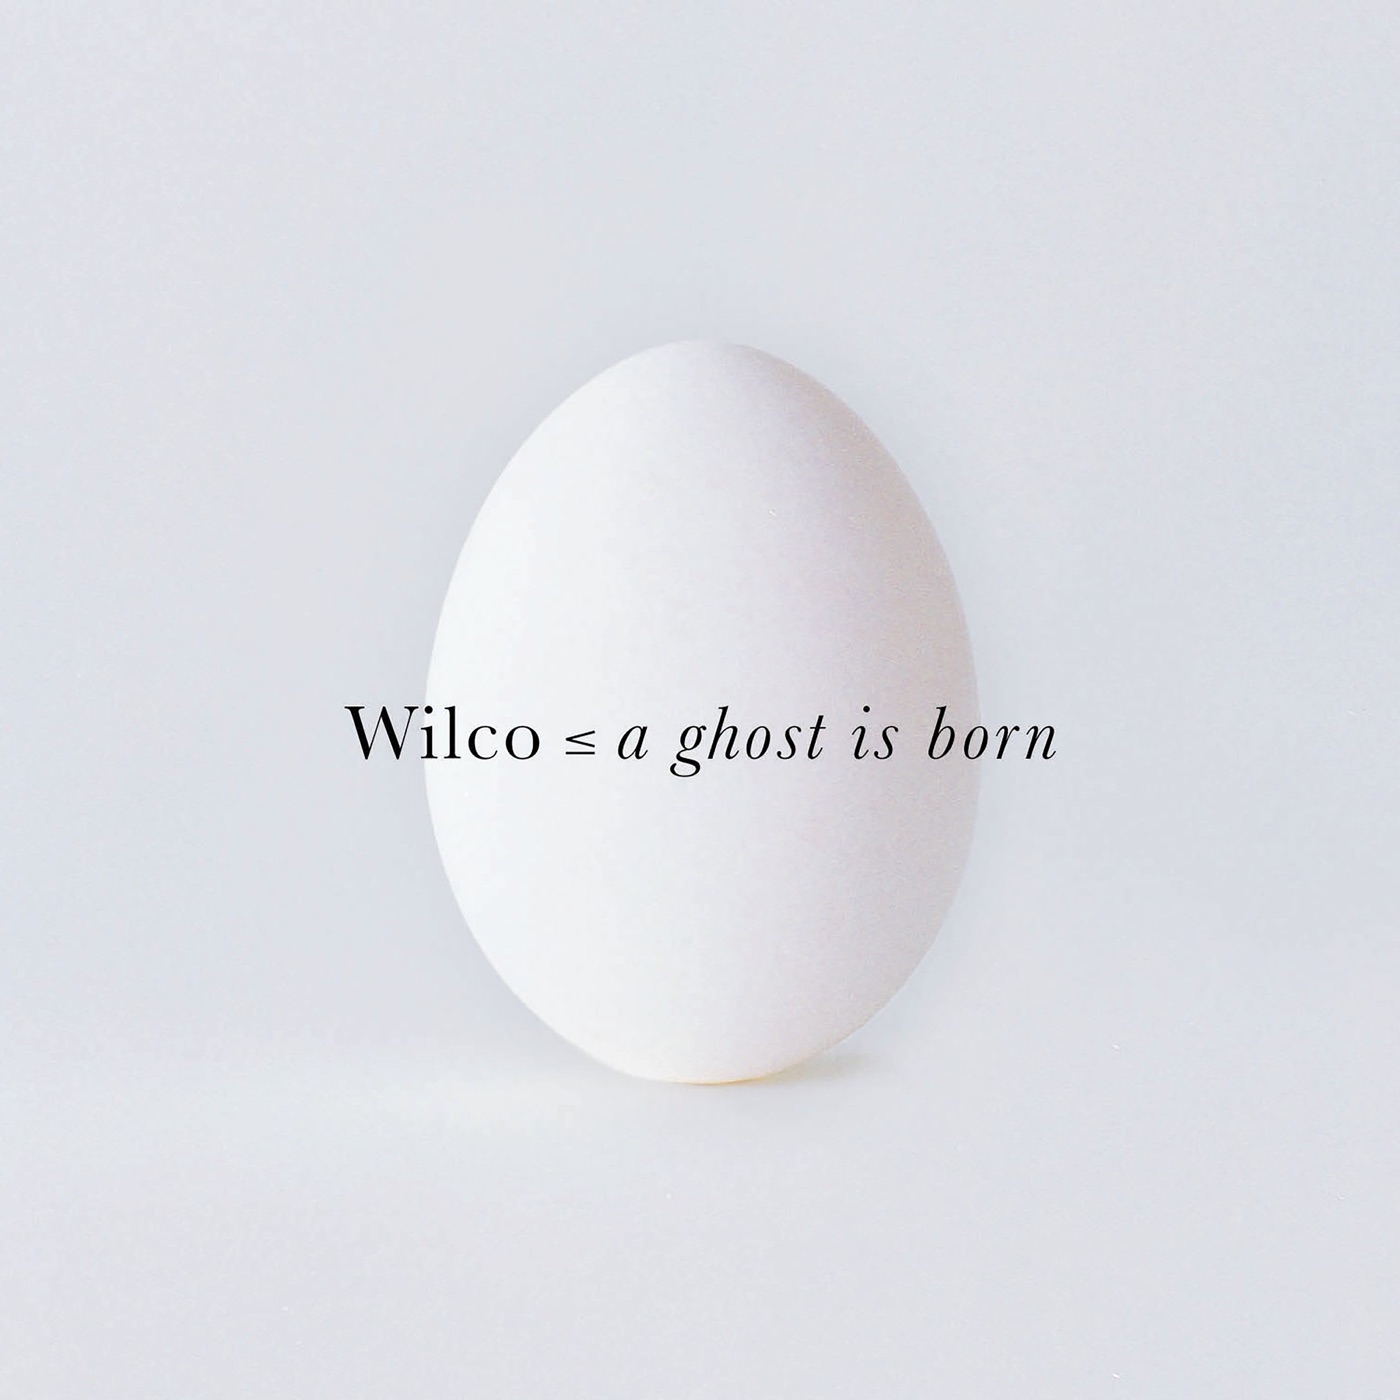 A Ghost Is Born by Wilco